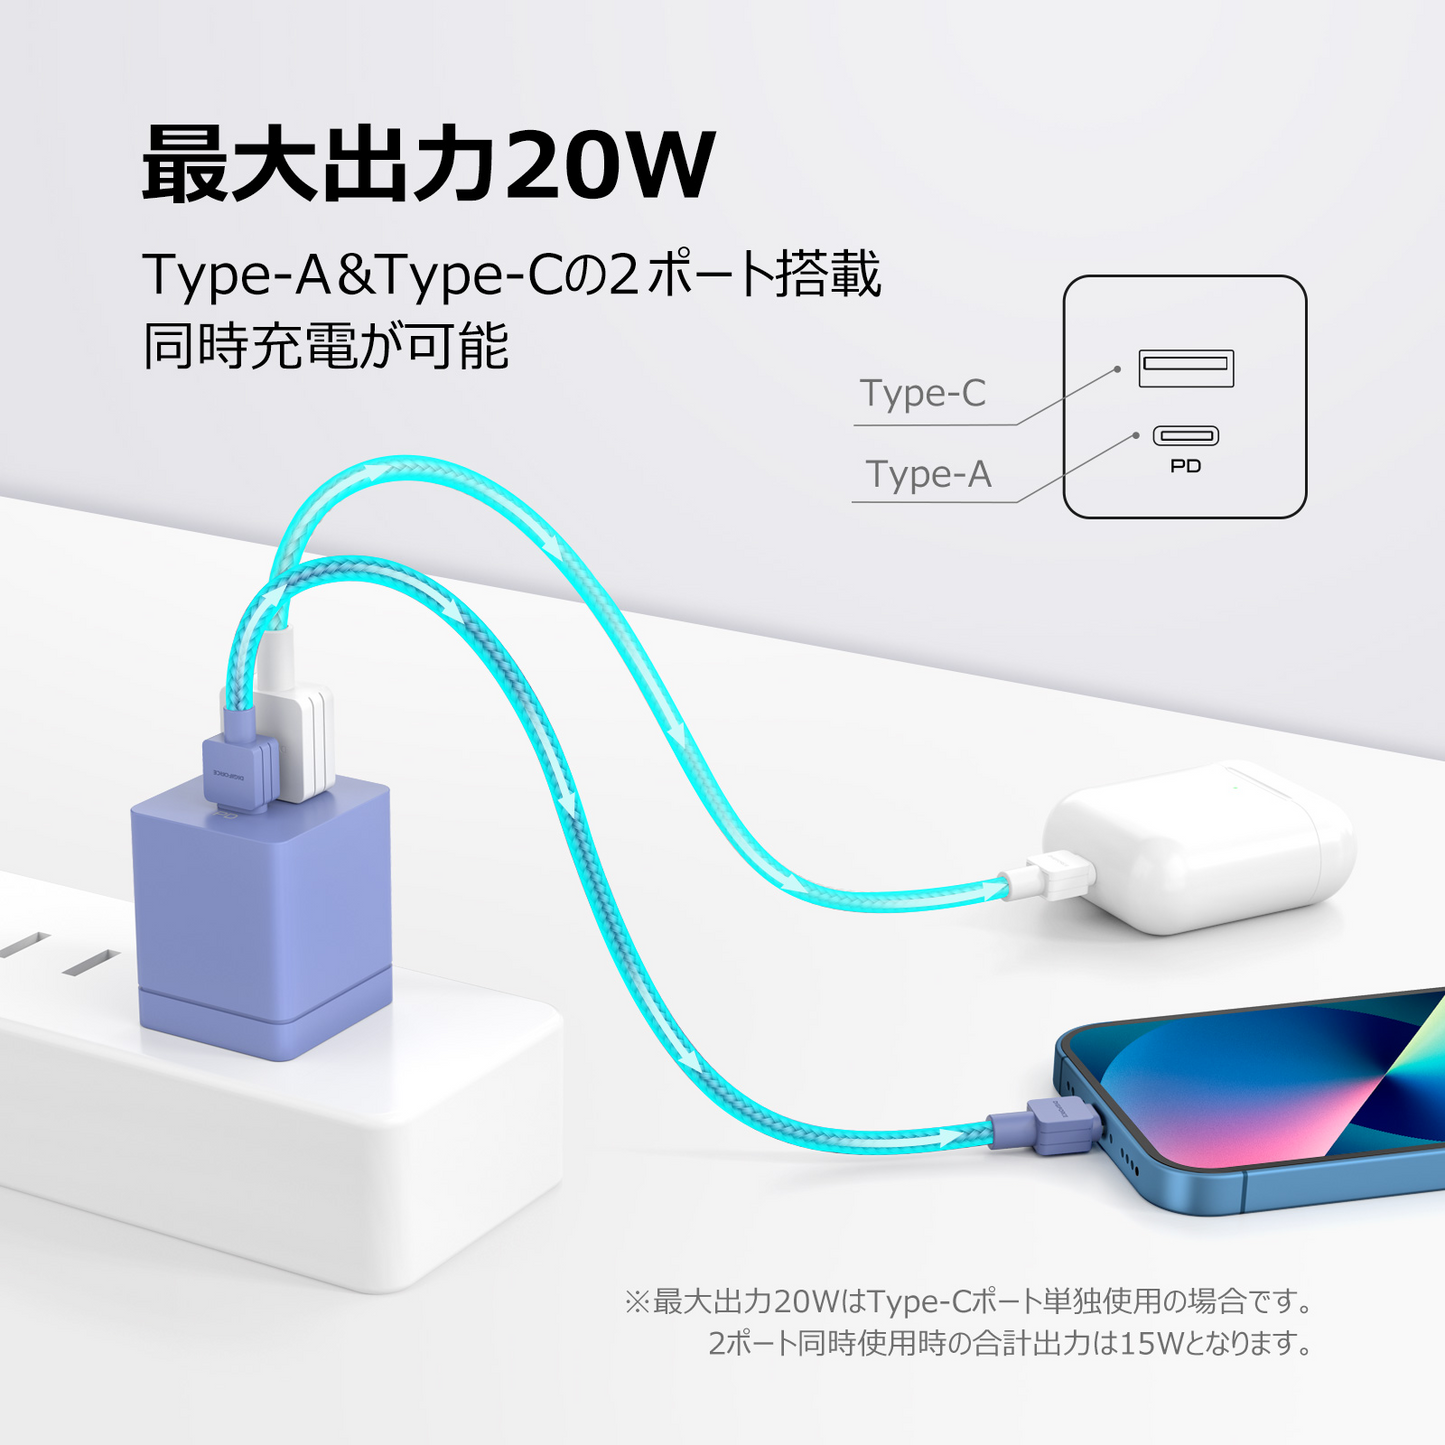 【cube 20W 1A1C】ACアダプター 急速充電 スマートフォン iPhone android D0061